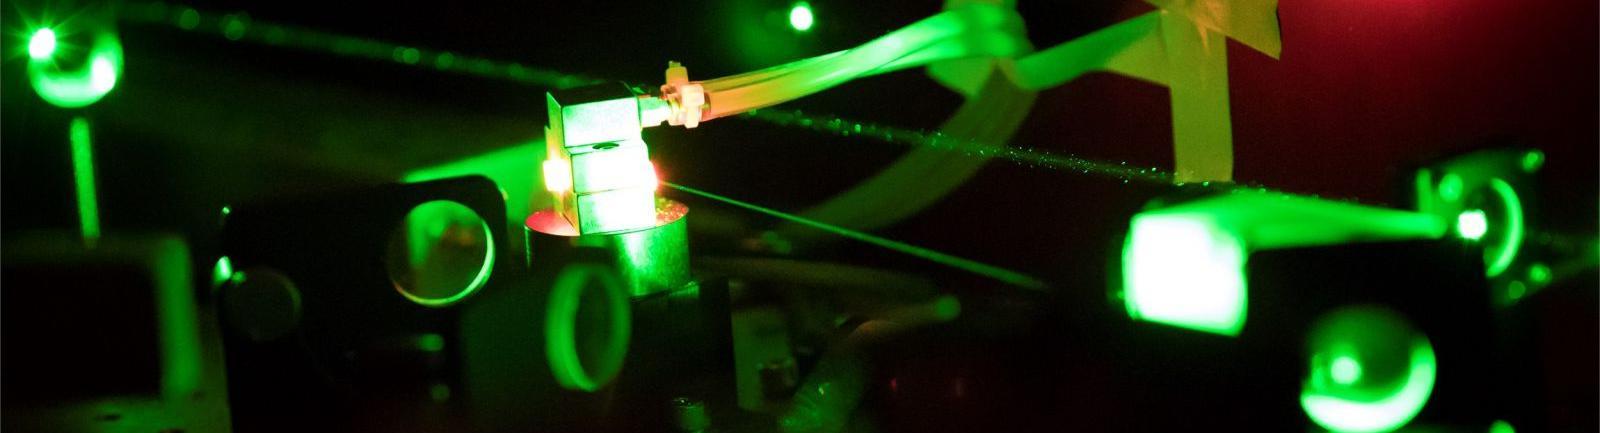 Image of equipment glowing green and red in a College of Science and Technology facility.